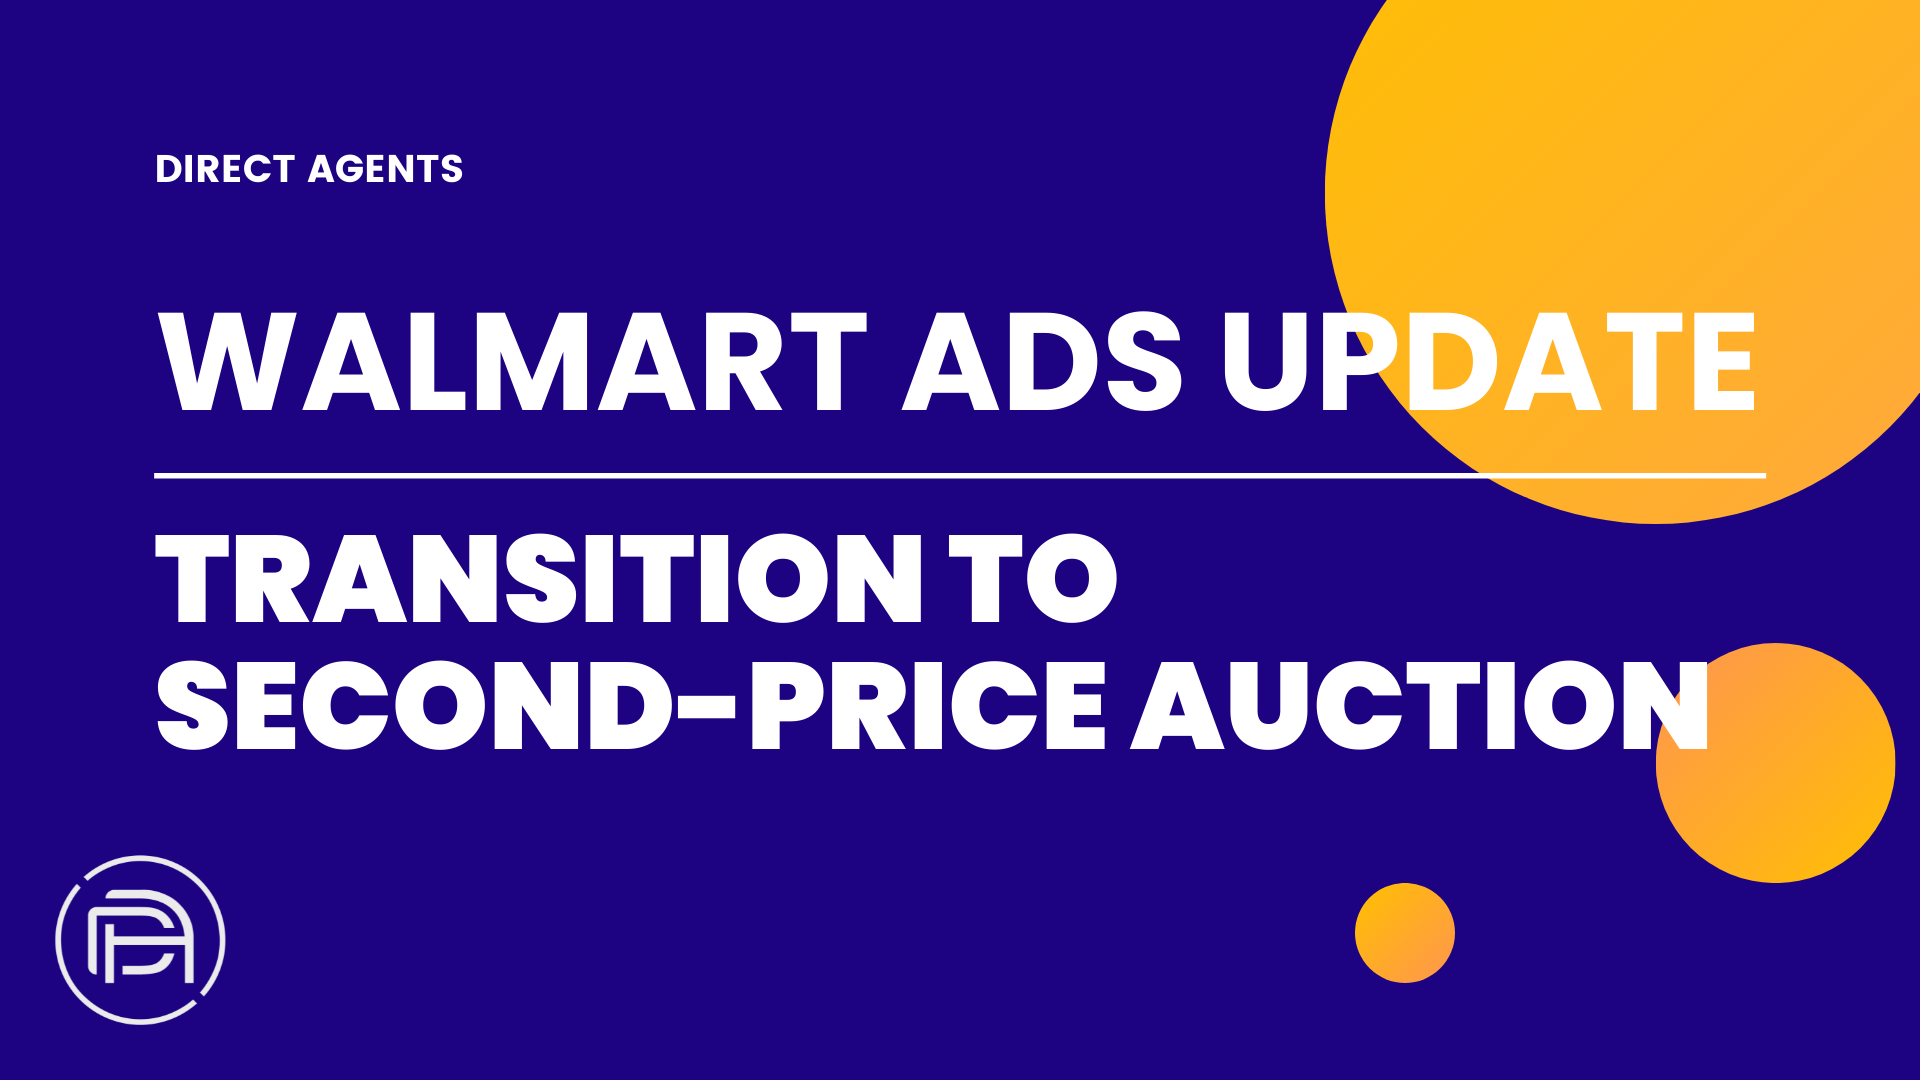 Walmart Advertising Update: Transition to Second-Price Auction